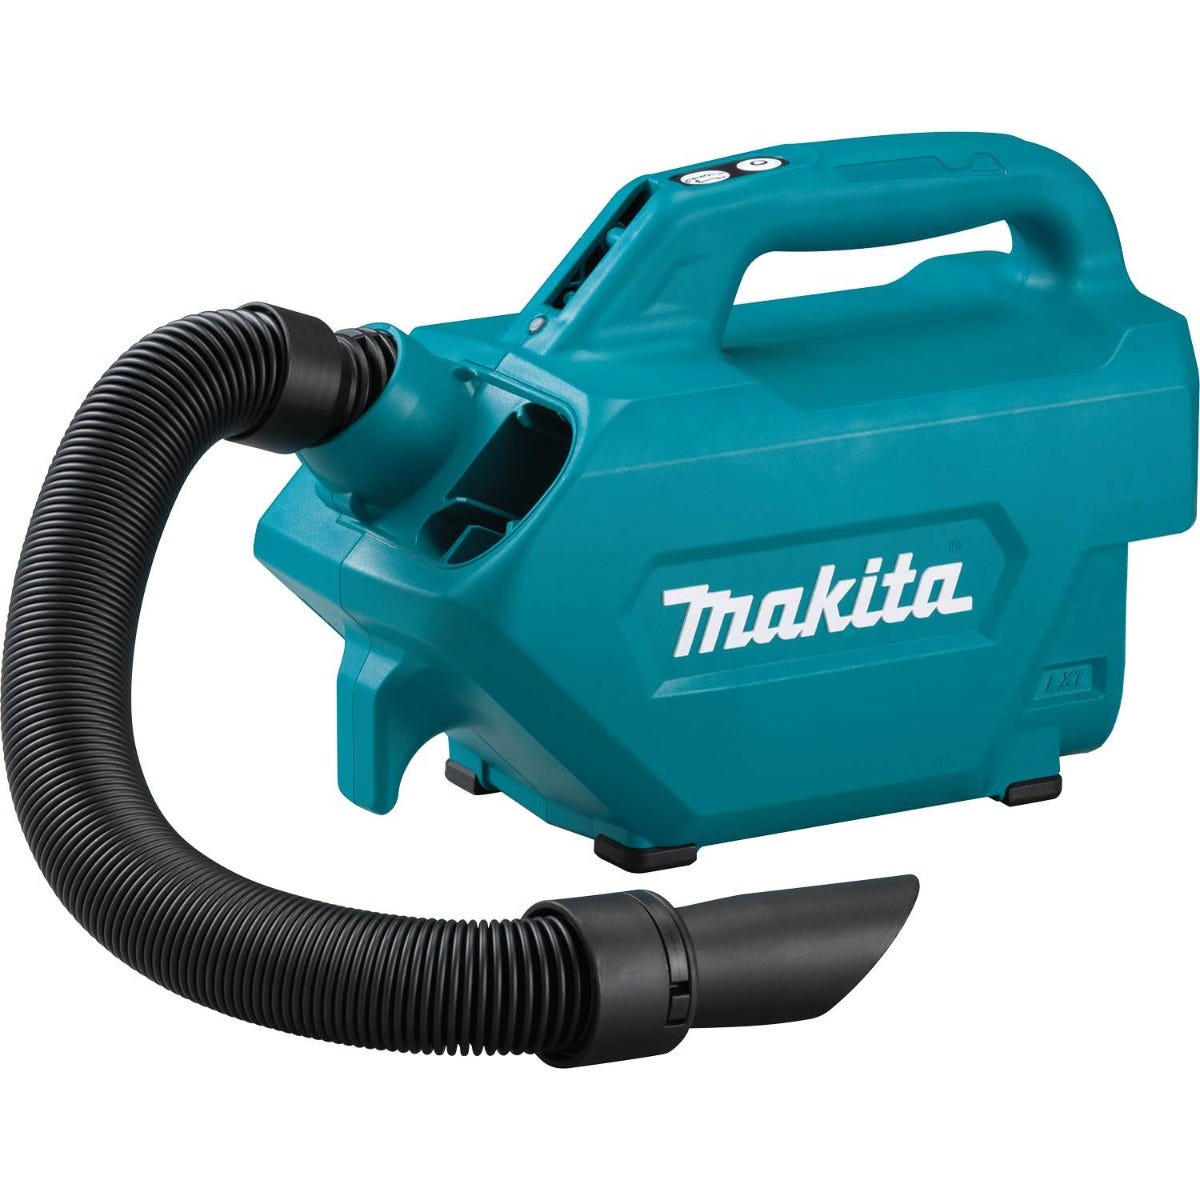 Makita XLC07Z 18V LXT Lithium-Ion Handheld Canister Vacuum, with BL1820B 18V LXT Lithium-Ion Compact 2.0Ah Battery - 1